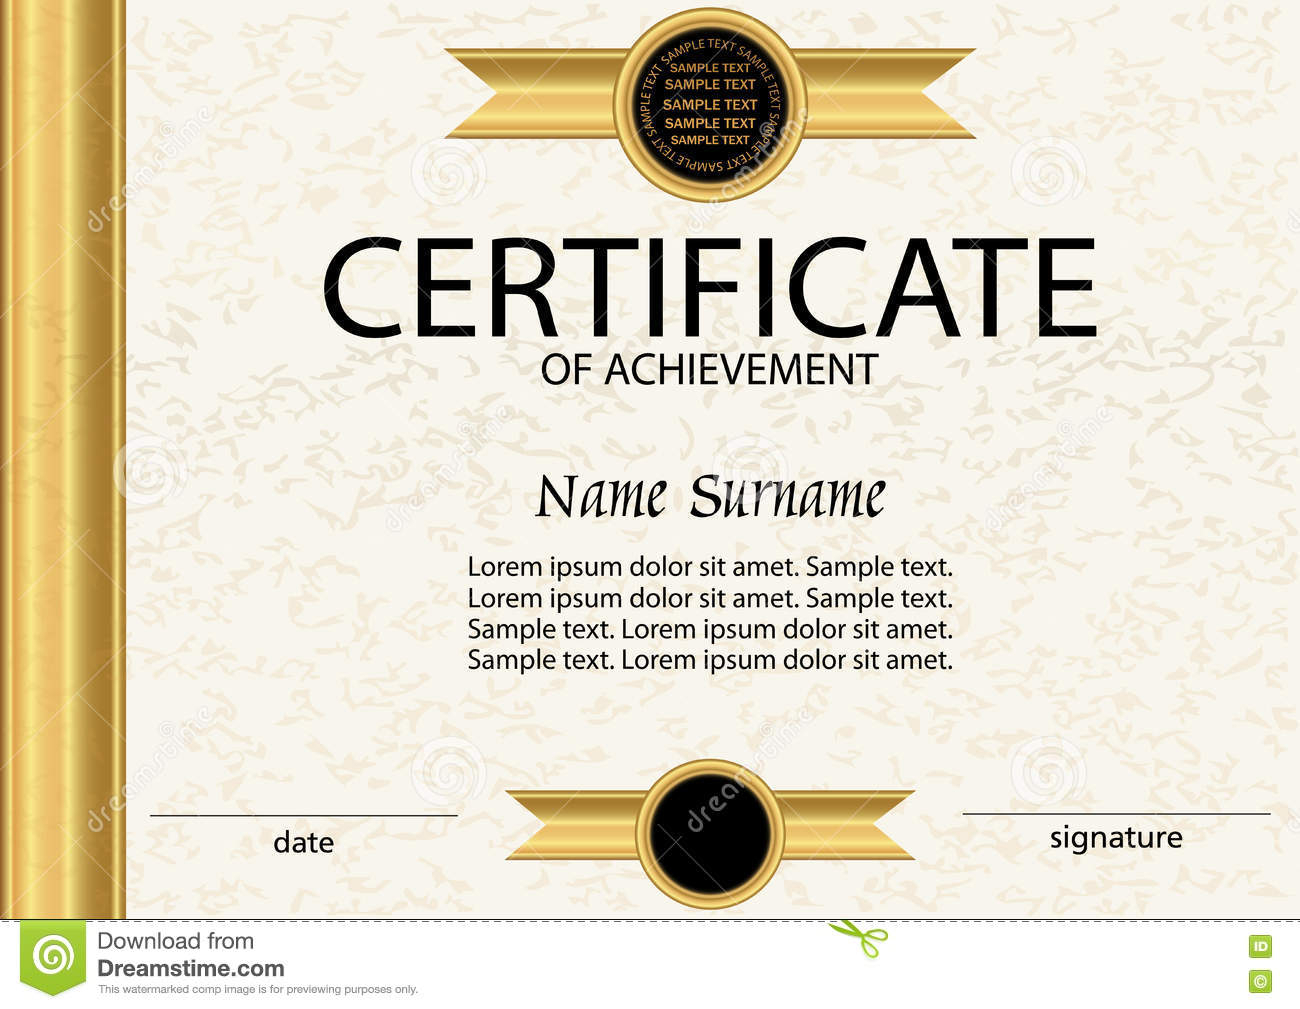 Certificate Of Achievement Or Diploma Template. Vector Stock With Certificate Of Attainment Template